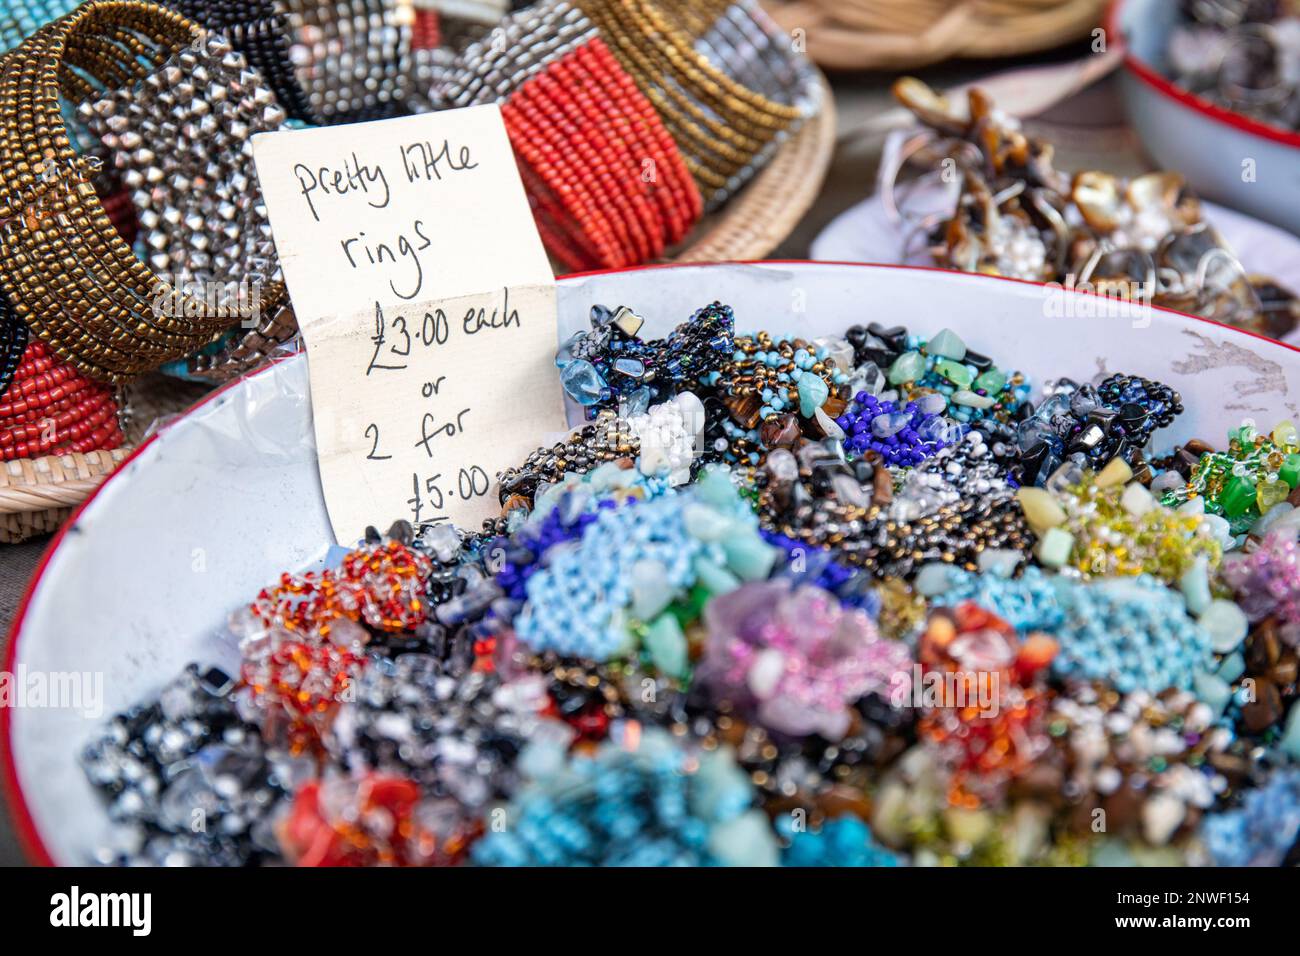 Pretty little rings for sale at Portobello Road in Notting Hill district of London, England Stock Photo